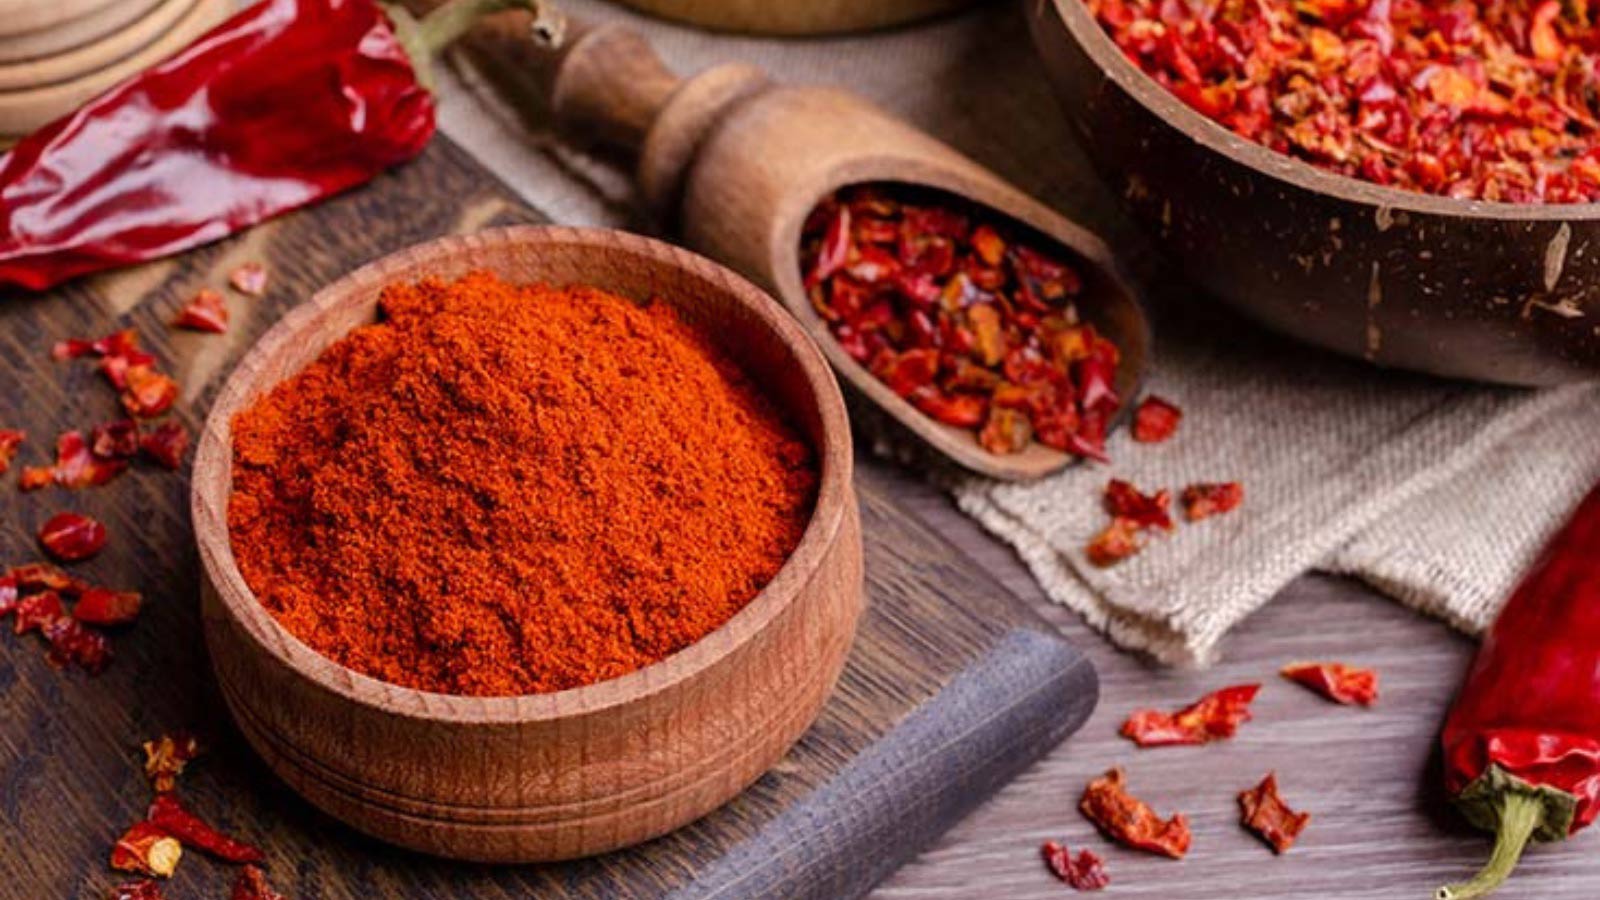 12 Must-Have Herbs And Spices Every Cook Needs